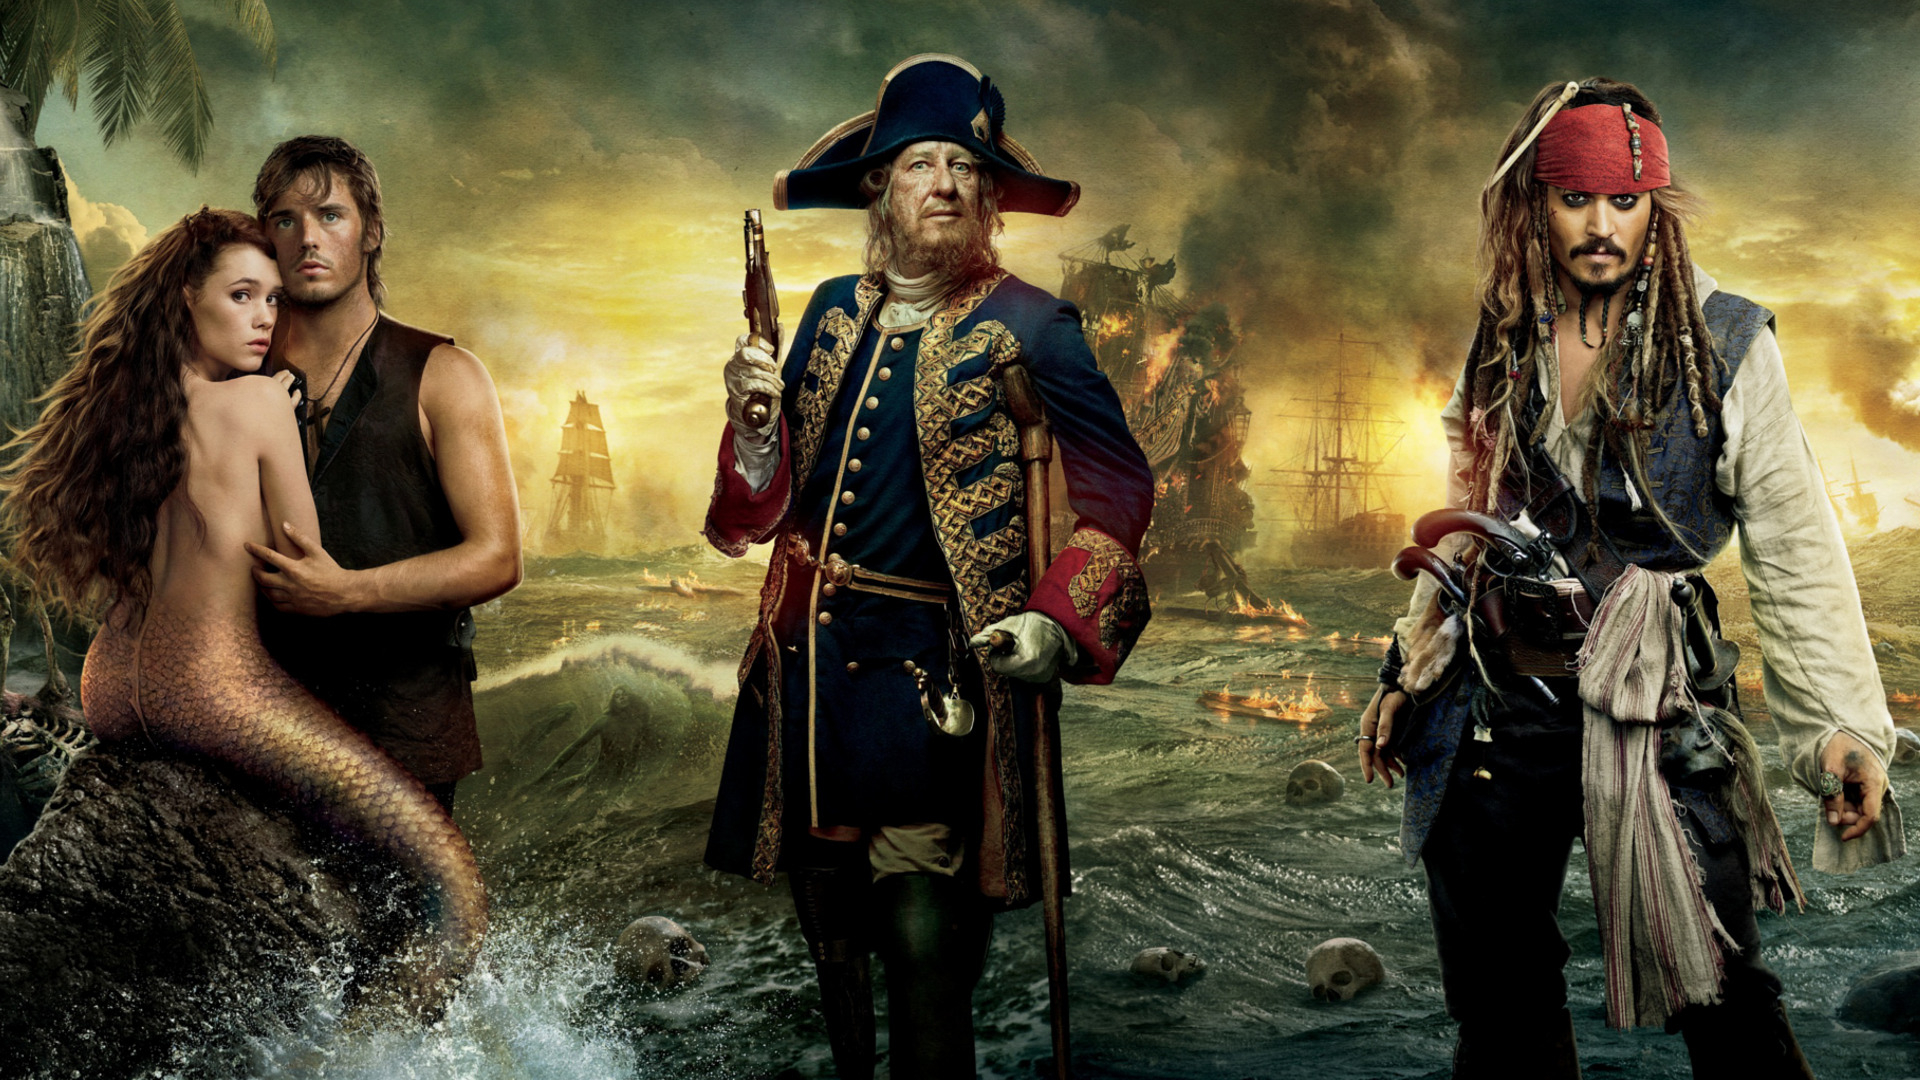 1920x1080 Pirates of the Caribbean: On Stranger Tides HD Wallpaper